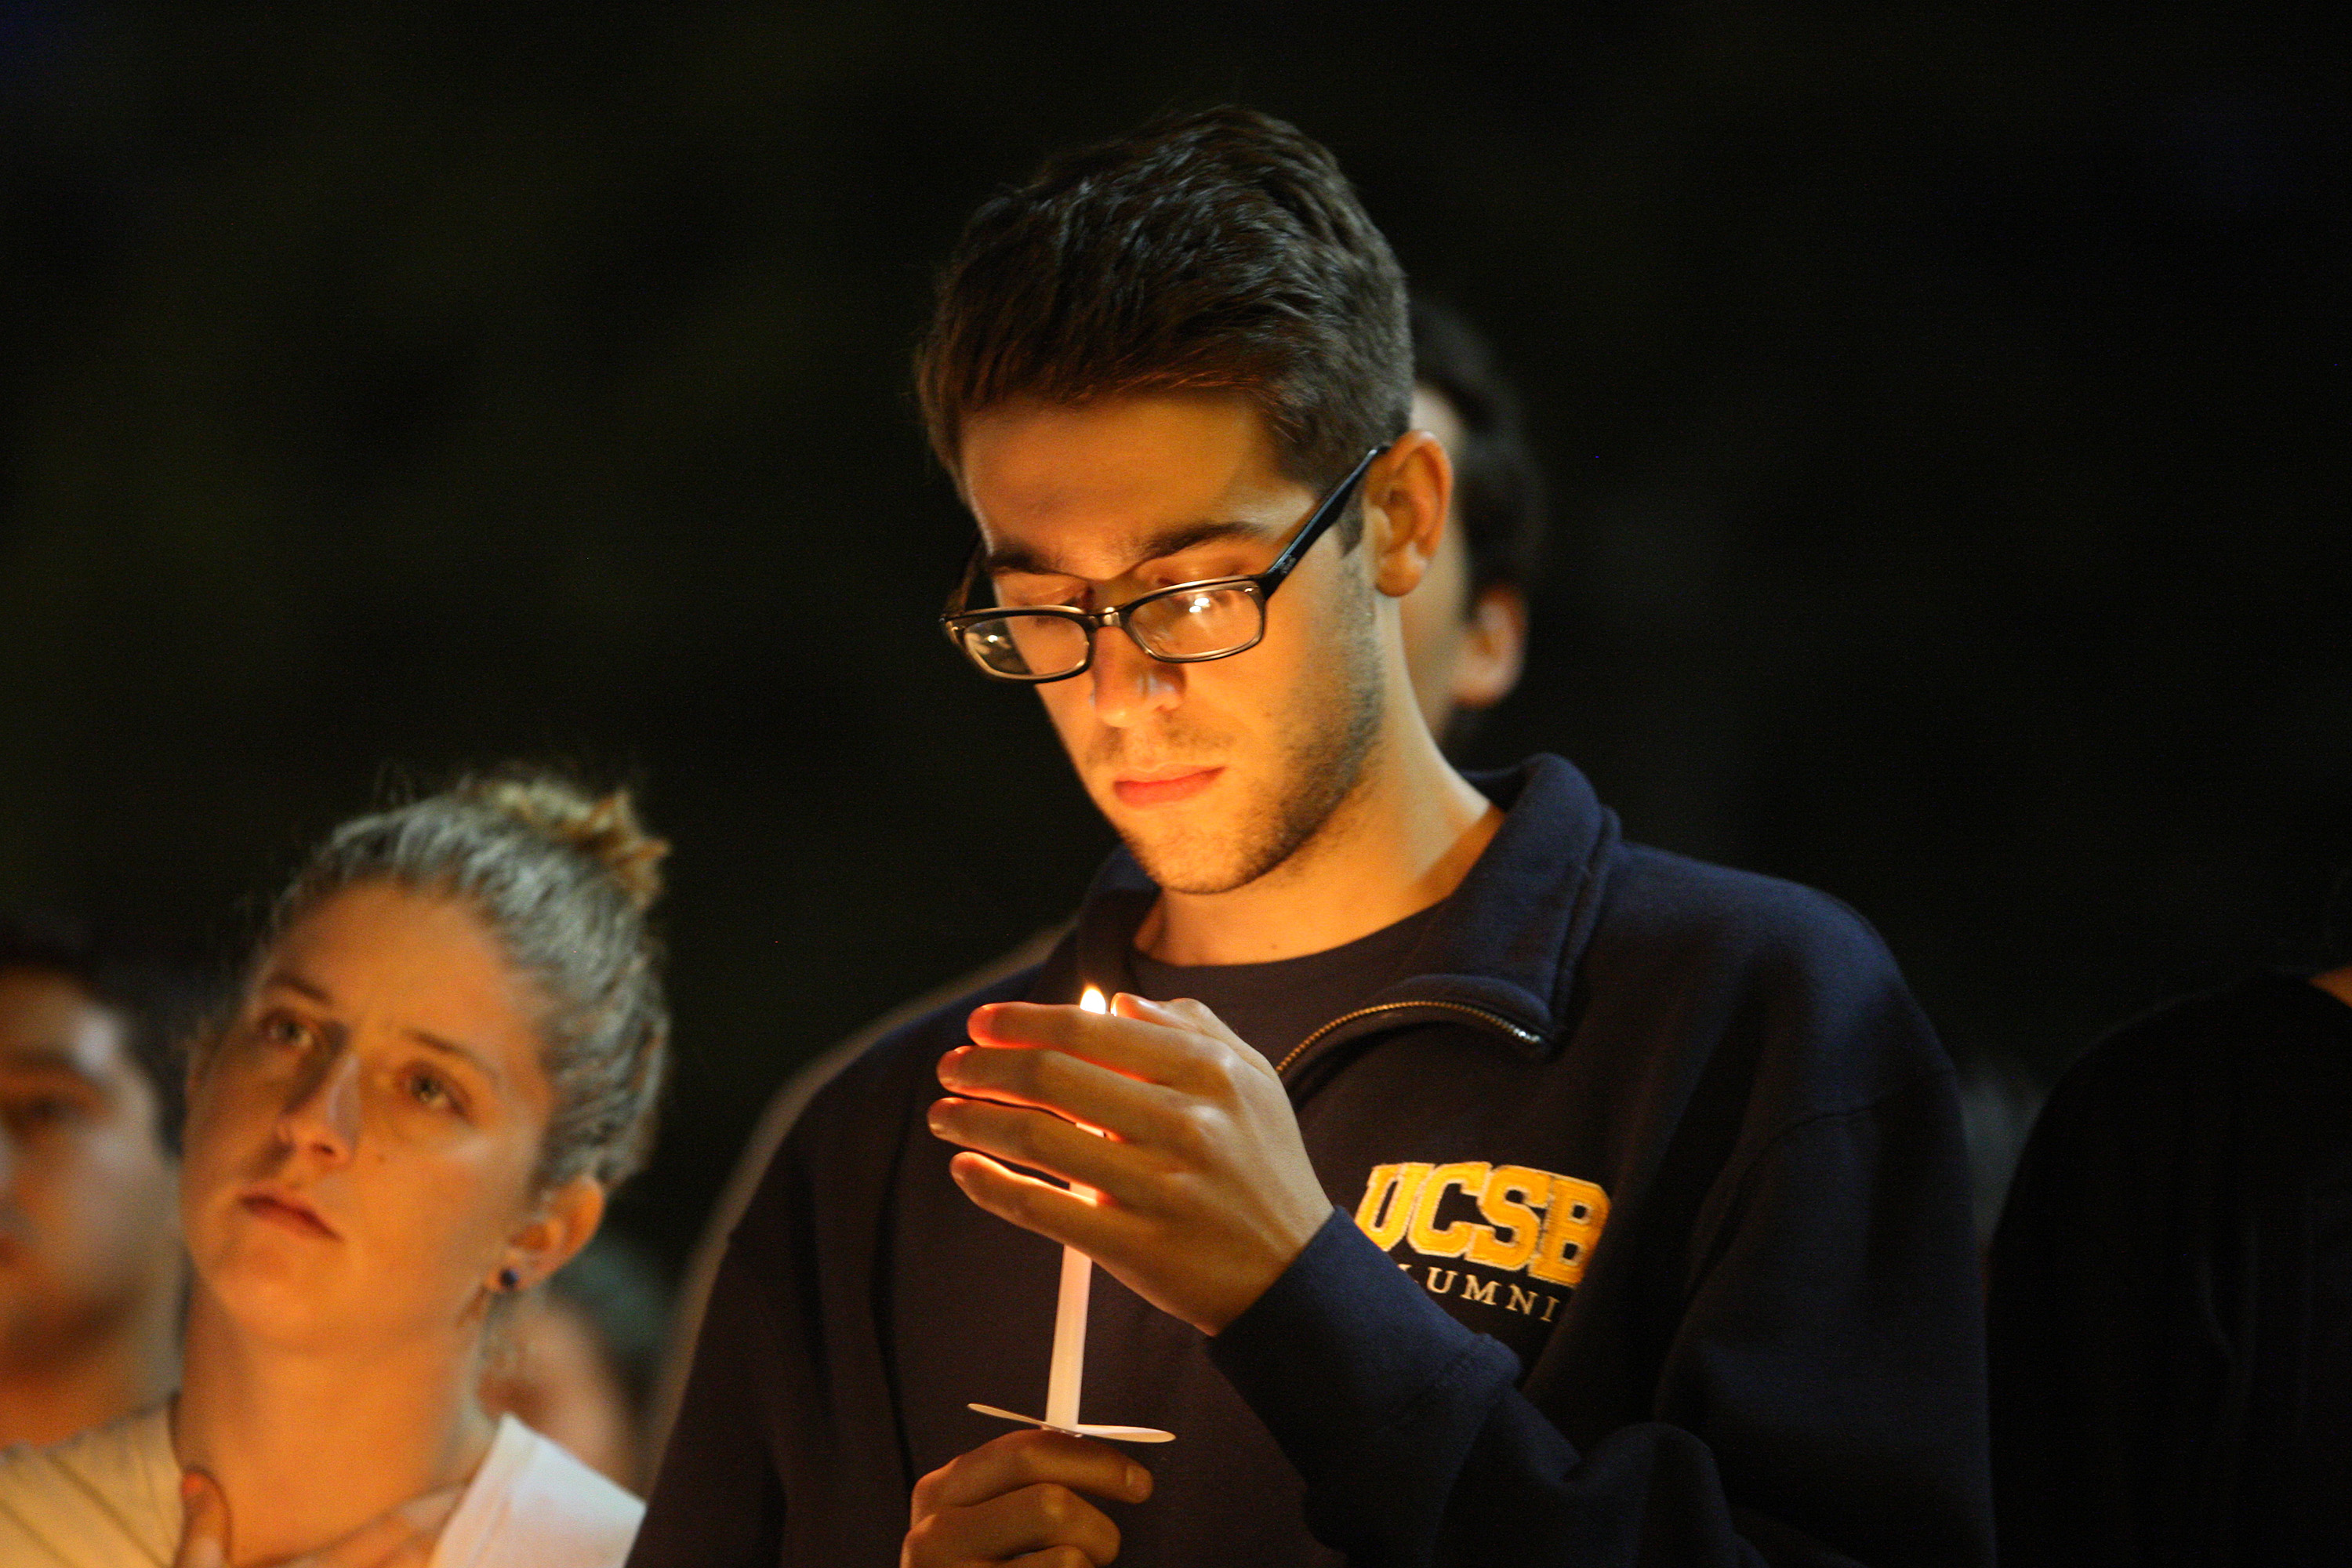 A UCSB student mourns the victims of yet another school rampage. (Getty Images)